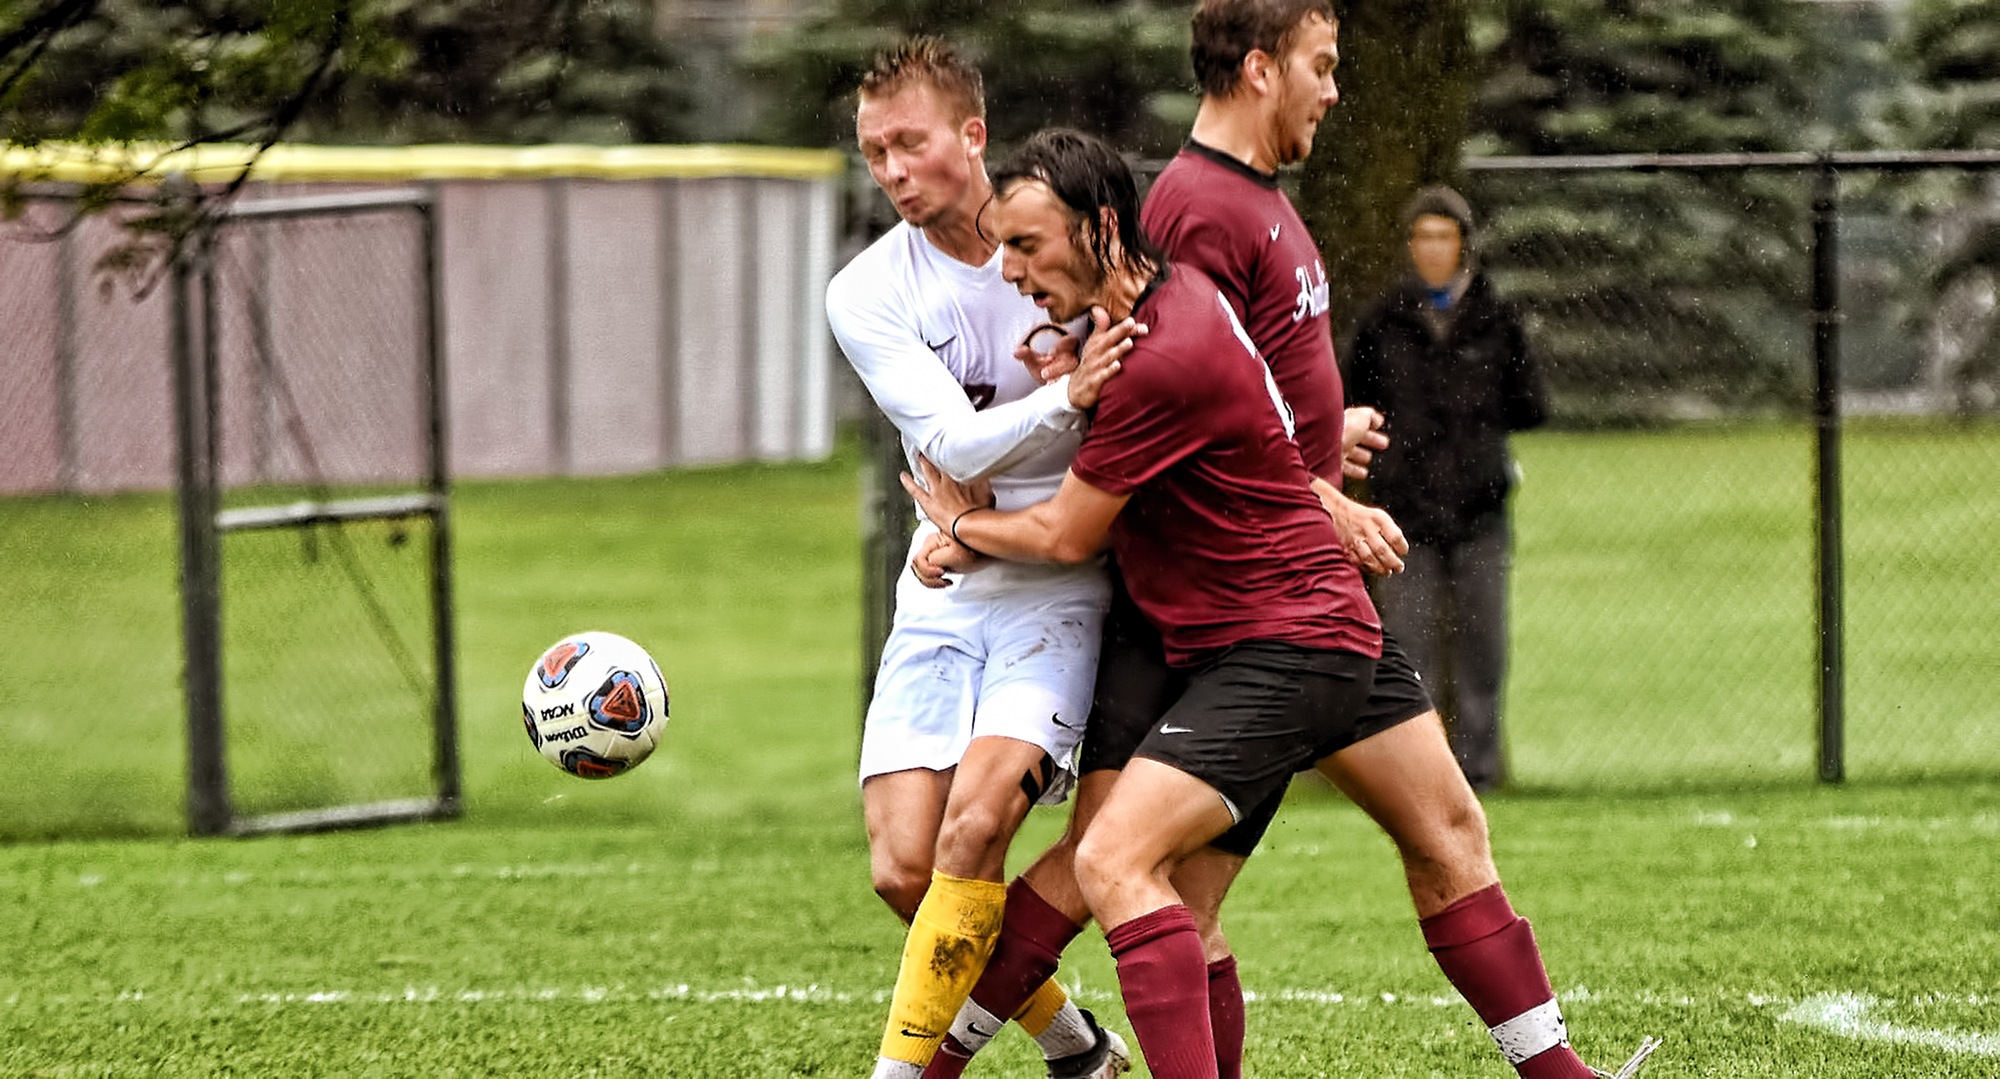 Senior Sam Gess collides with a Hamline player during the Cobbers' 4-2 win. Gess scored three goals in the second half.